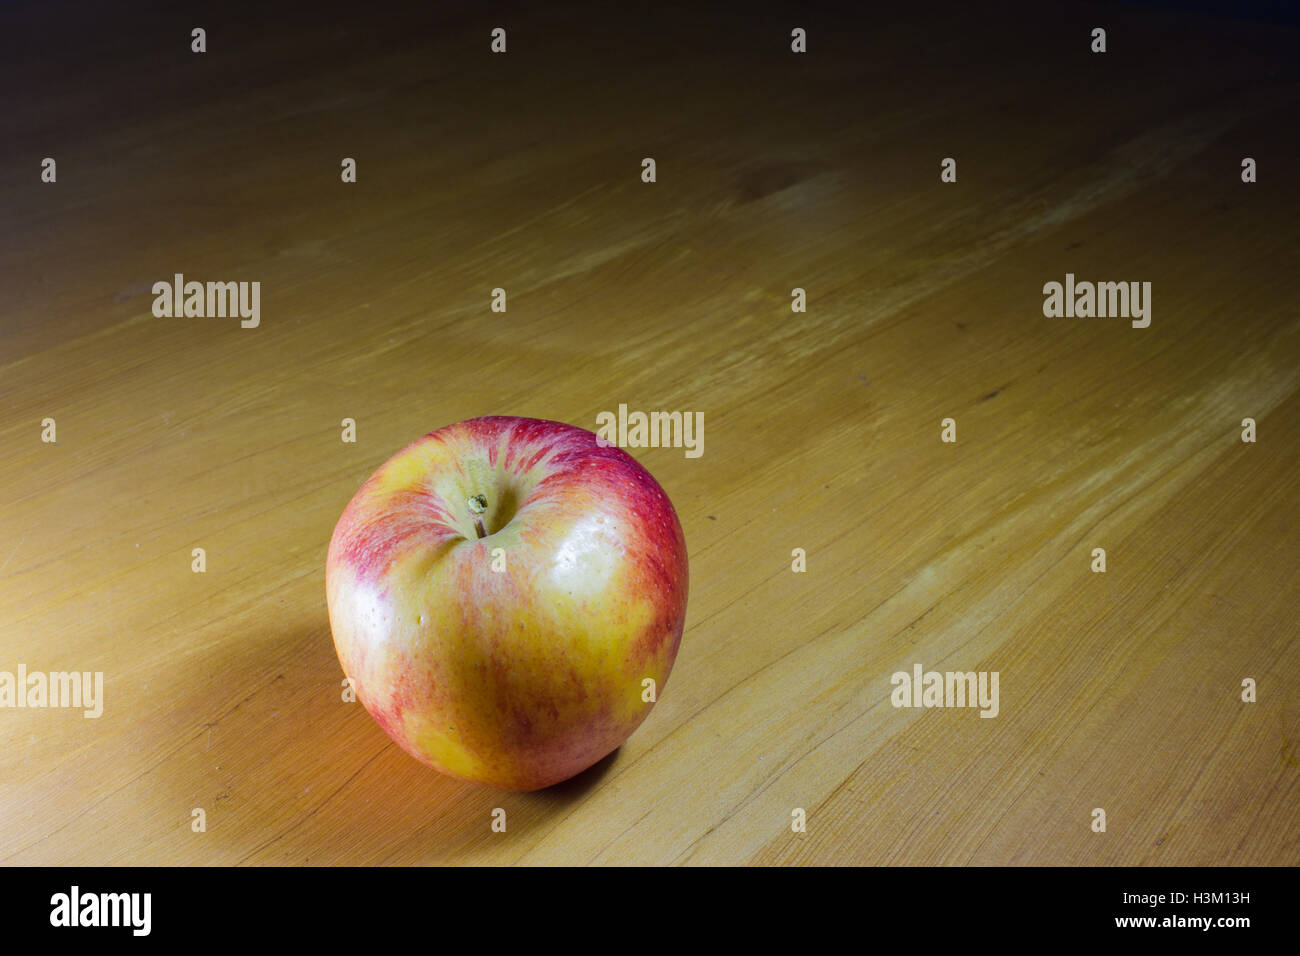 Red apple on wood table Stock Photo